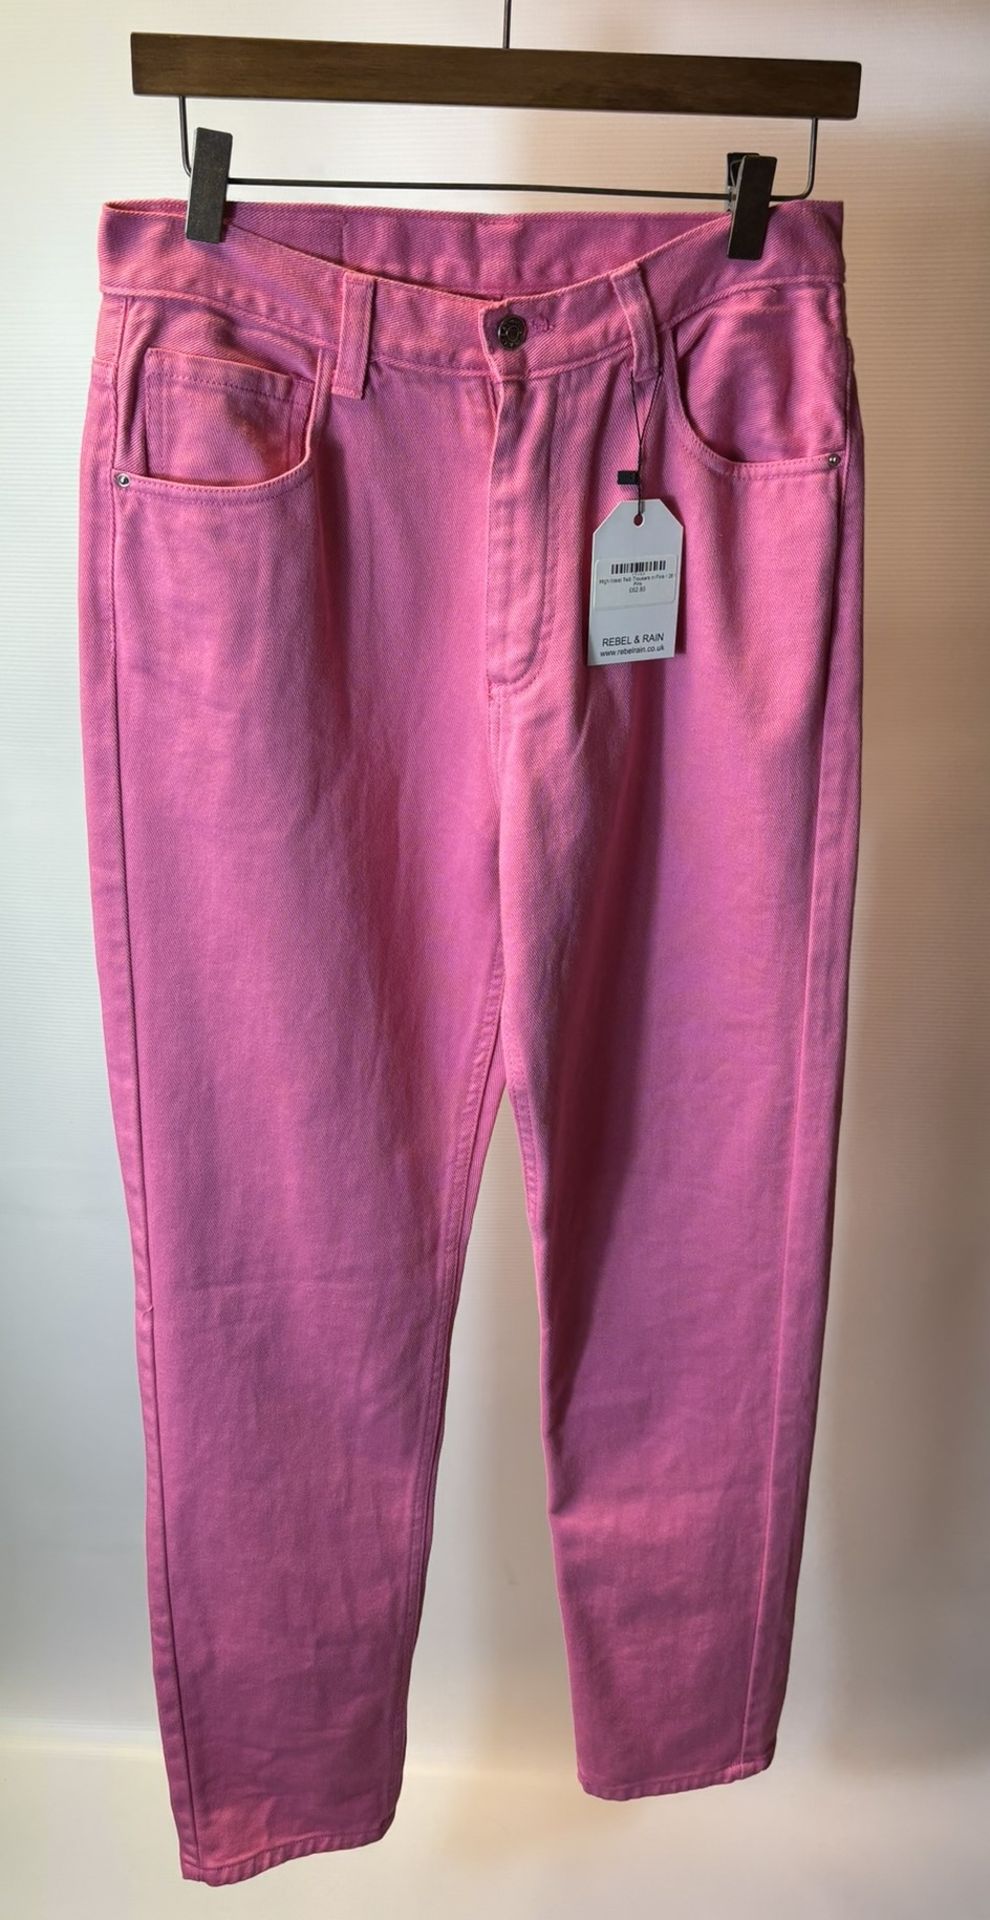 12 x Various Pairs Of Women's Trousers/Jeans As Seen In Photos - Image 34 of 36